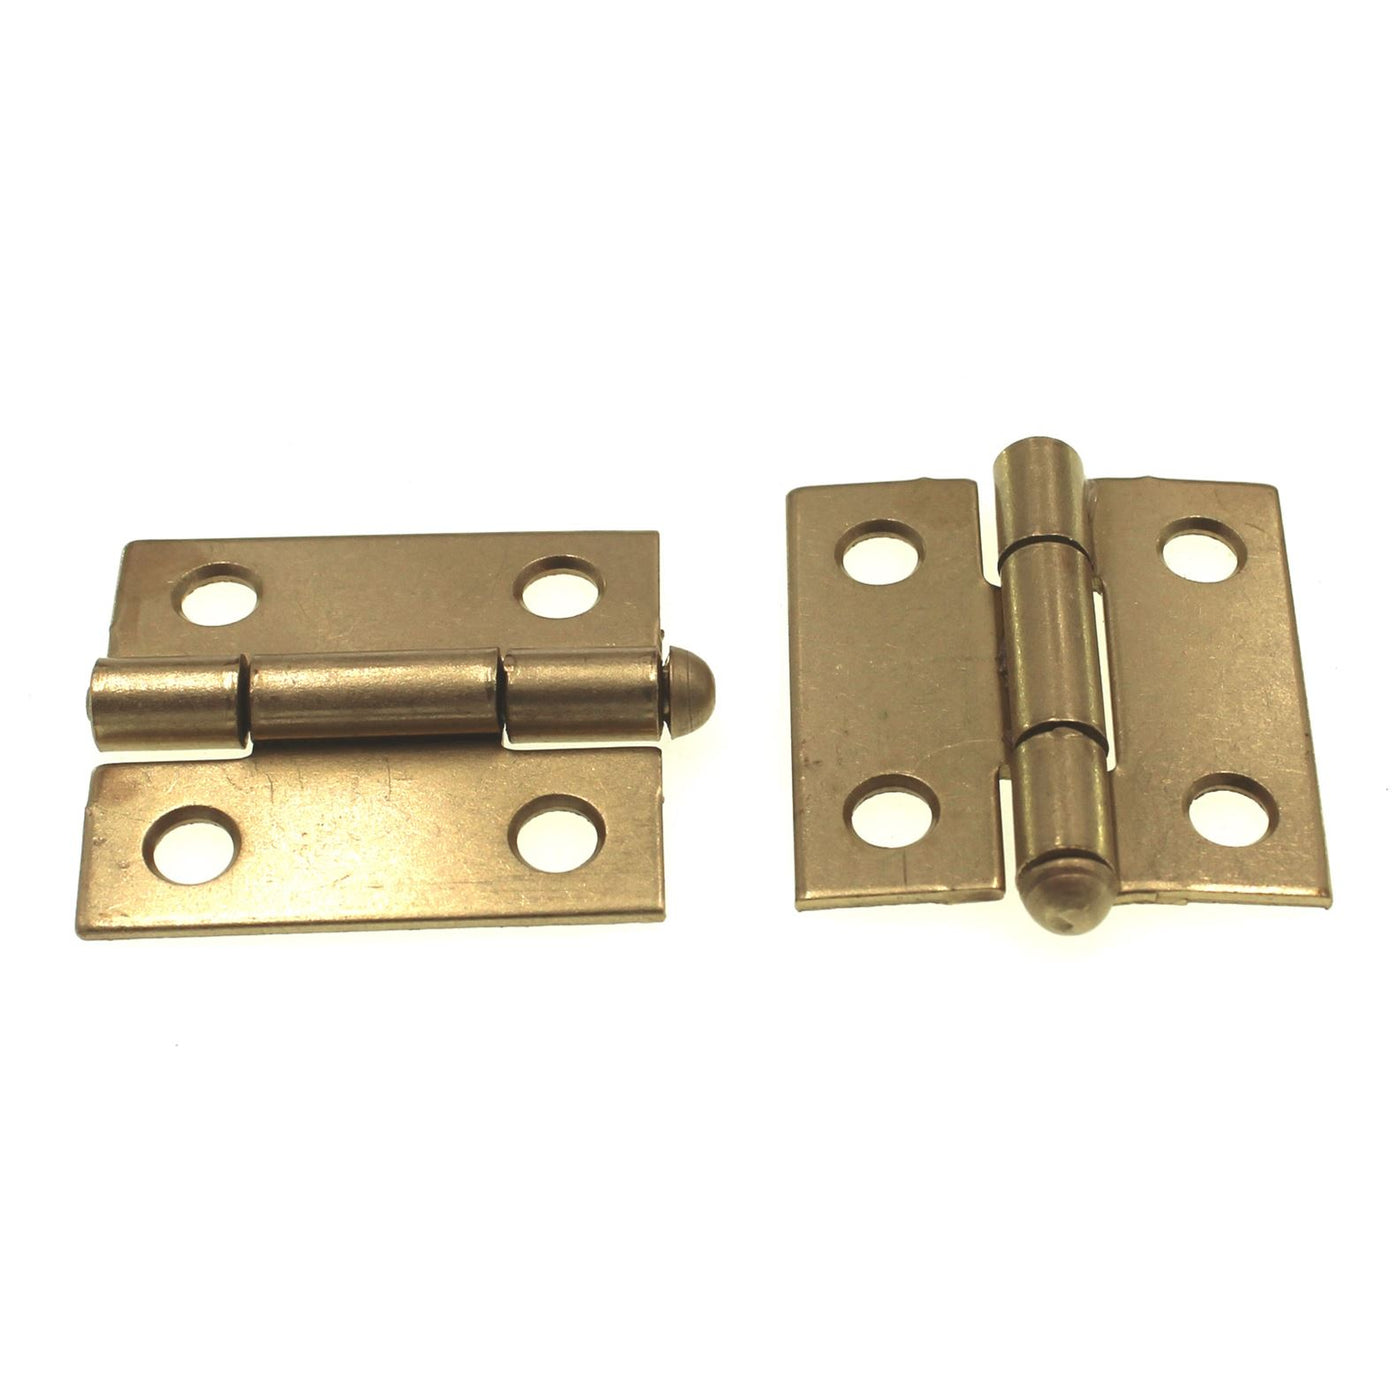 Lawrence Brothers 1 1/2 x 1 3/8 Loose Pin Narrow Hinges 2 Pack D820S